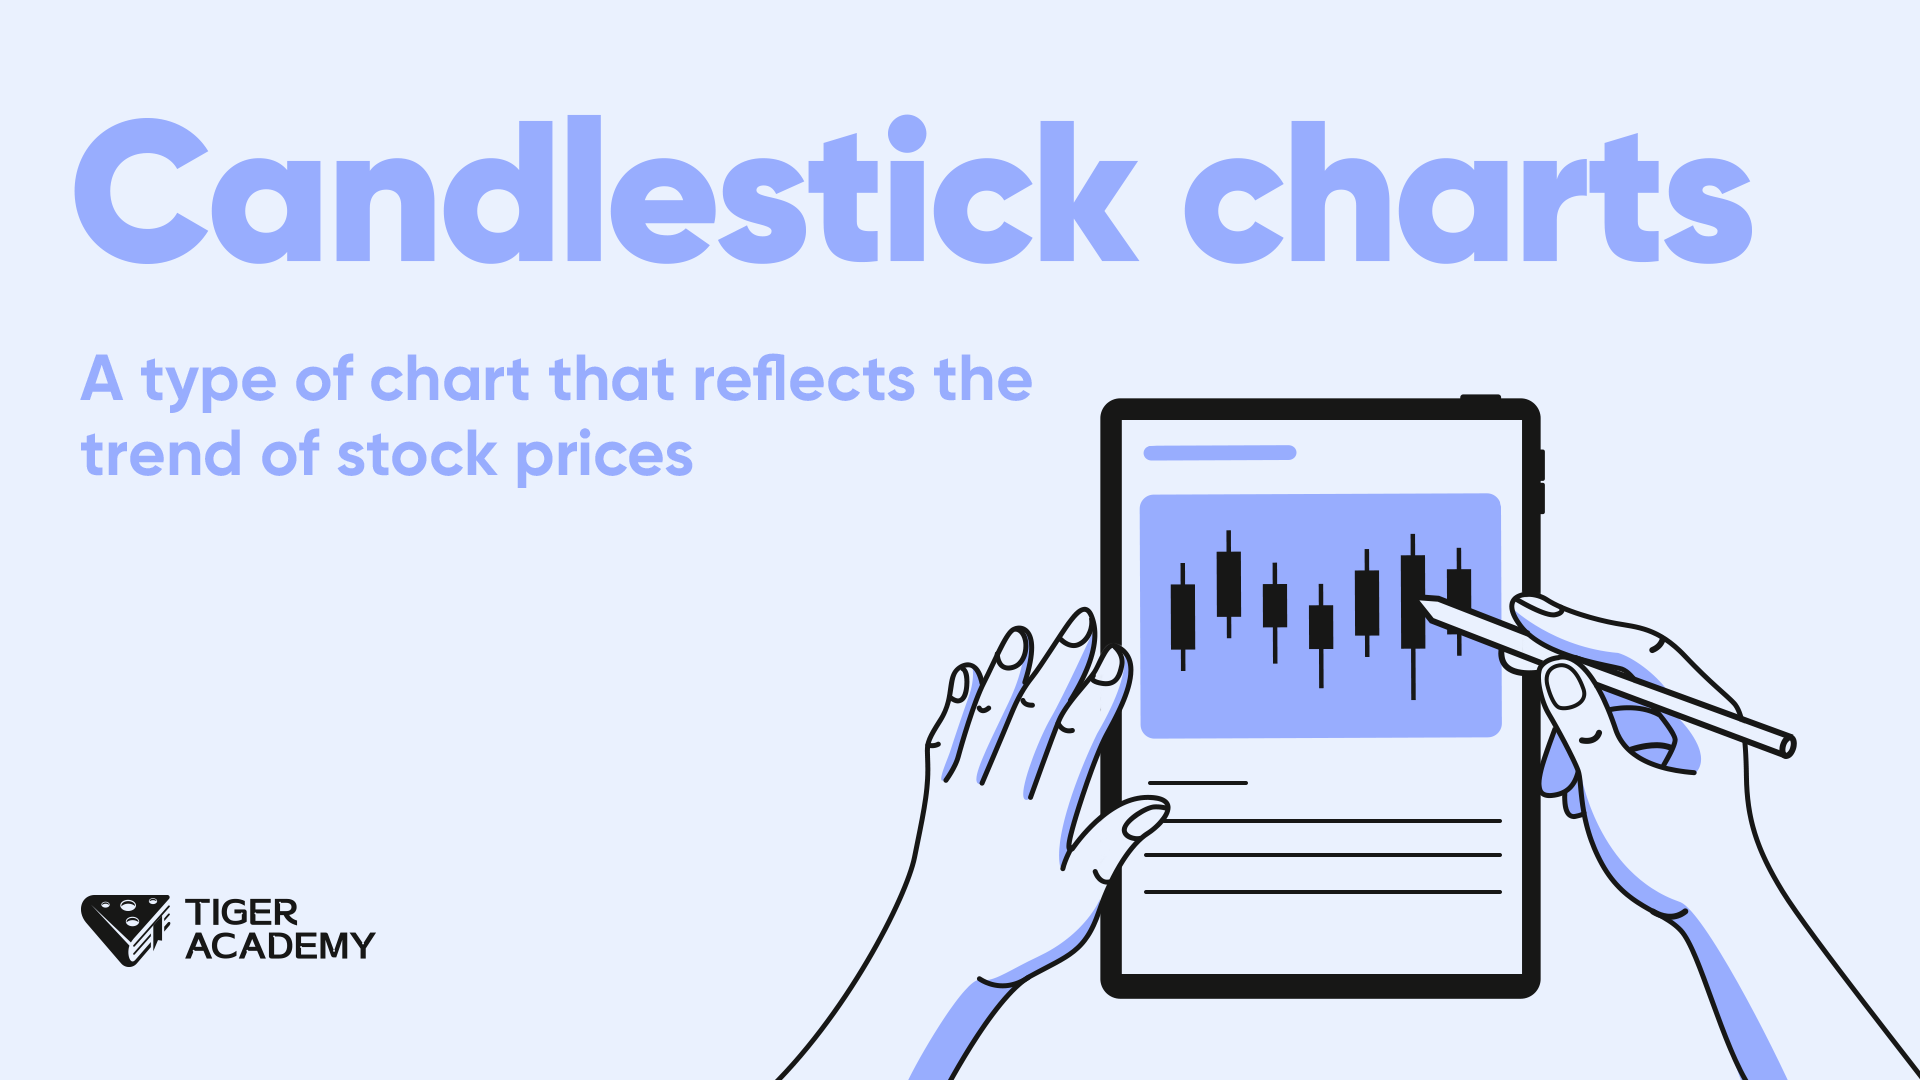 Day29.Candlestick charts